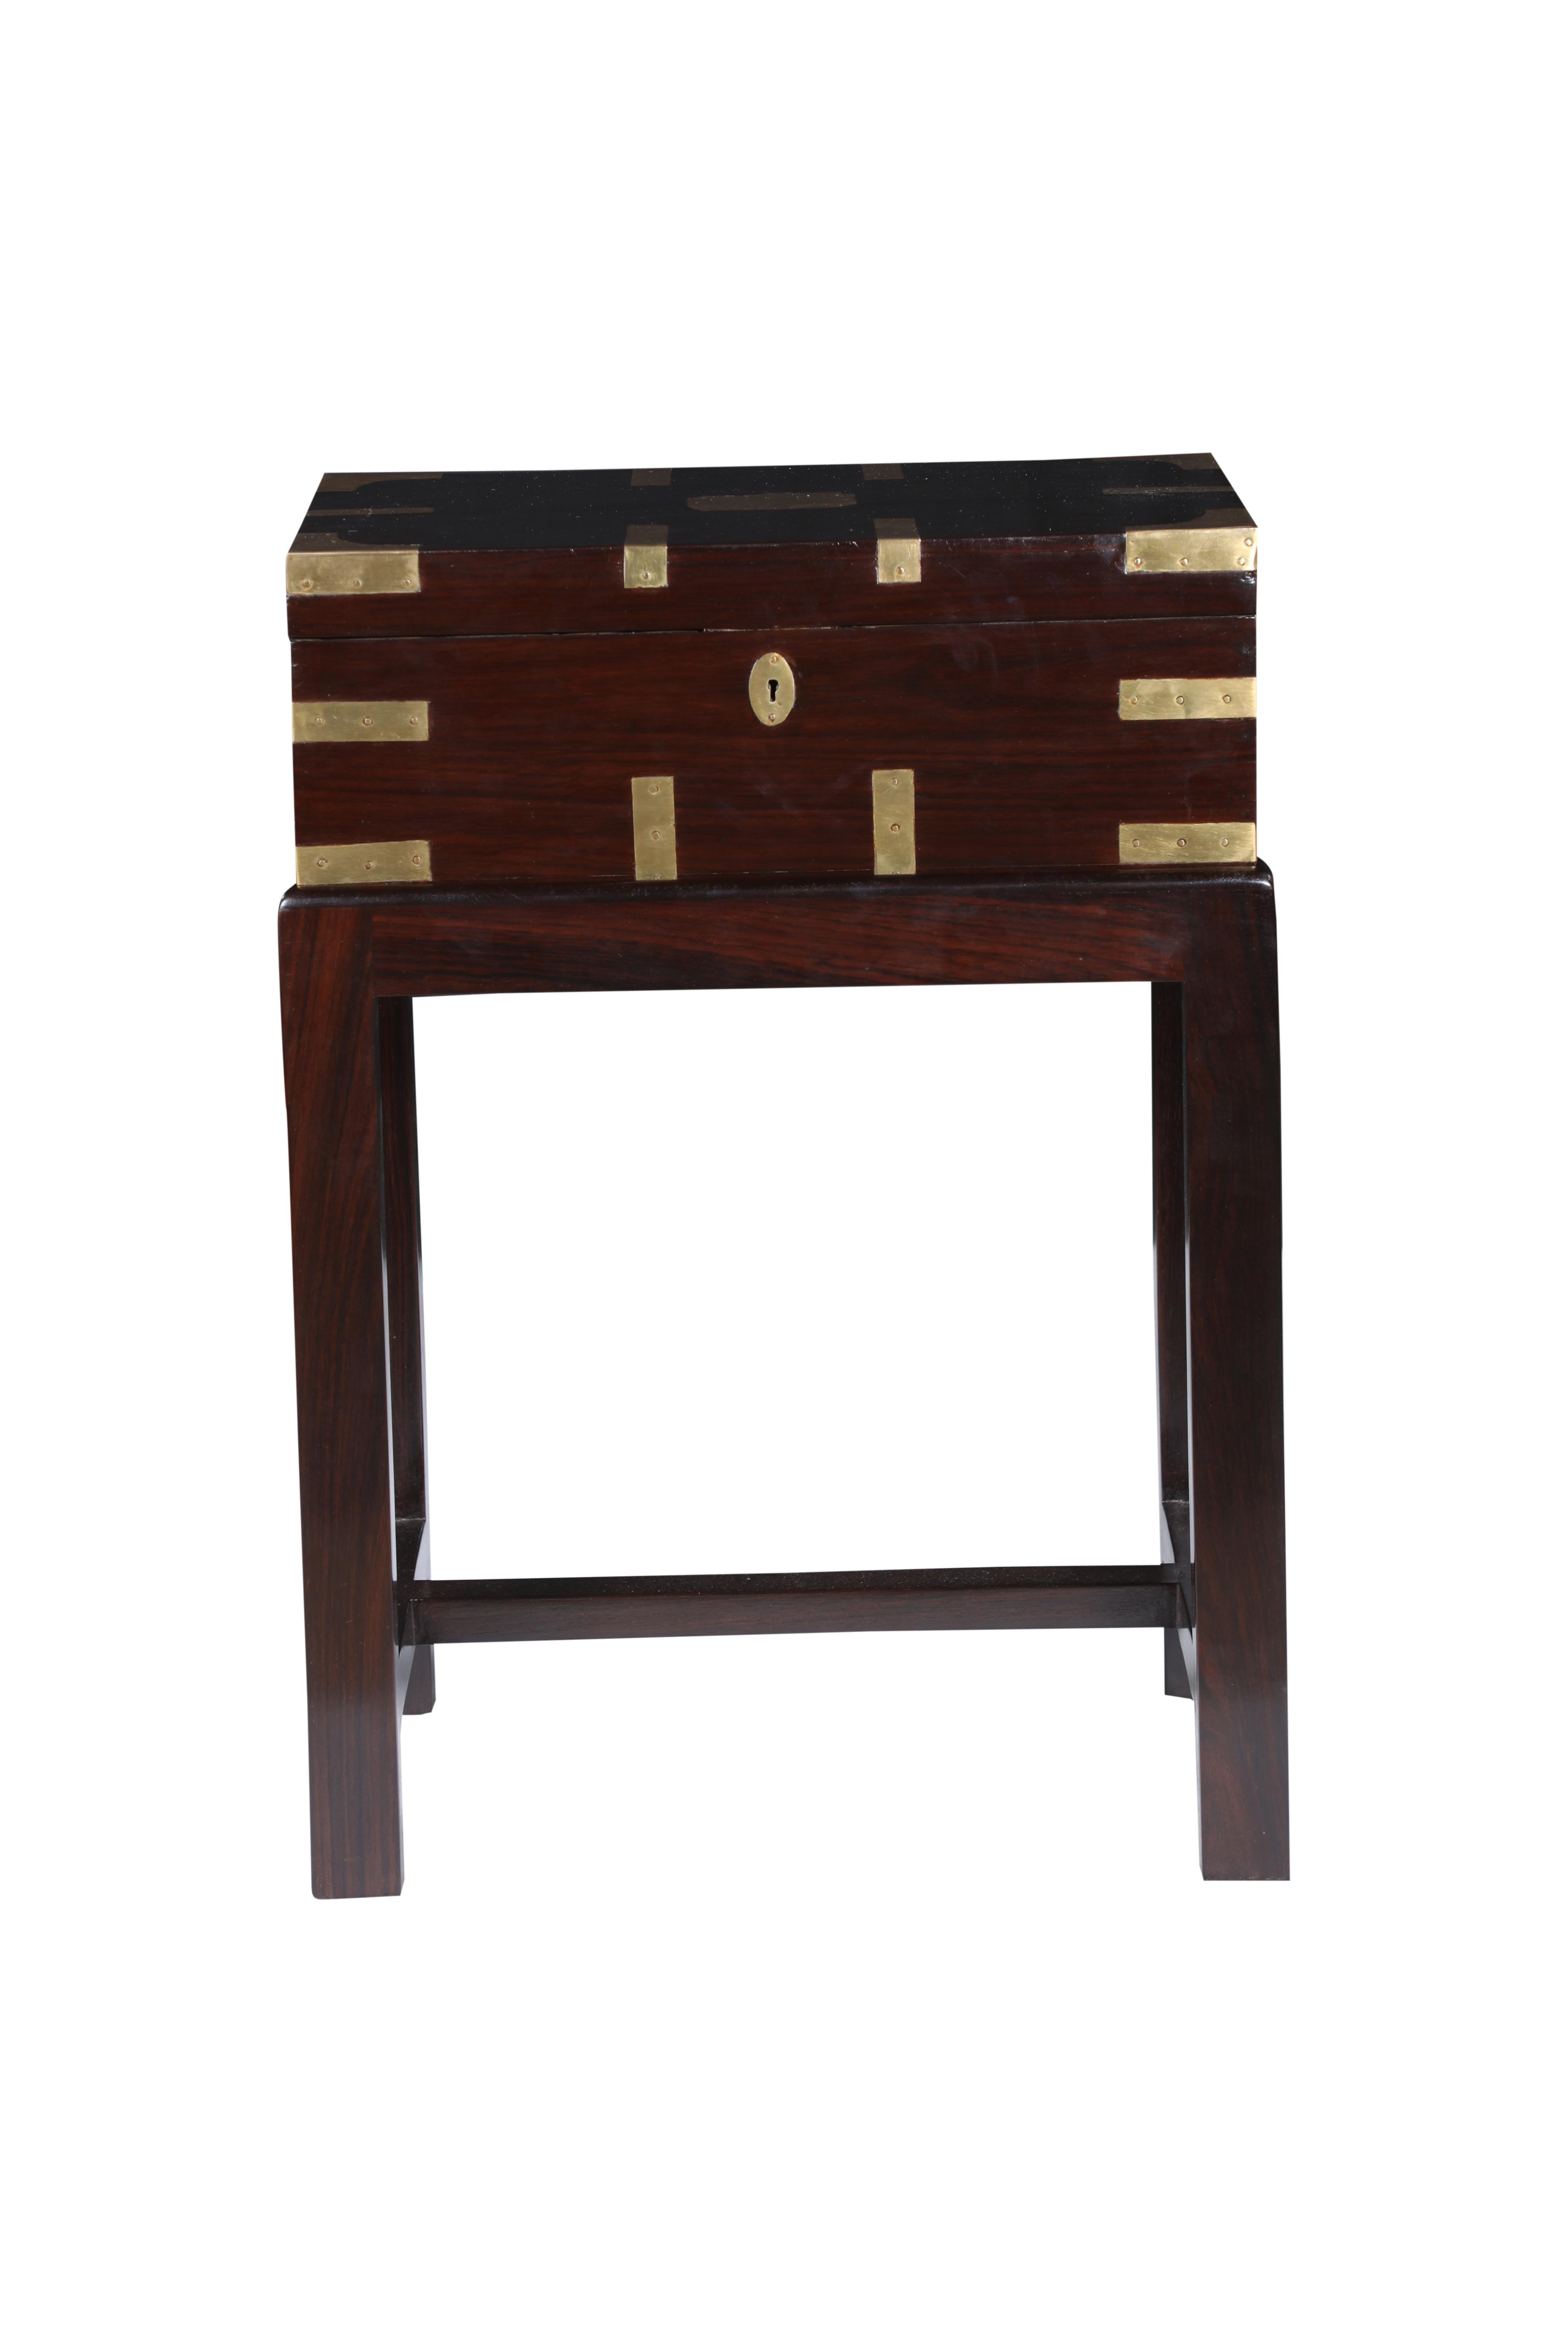 A handsome, rosewood British Campaign officer's chest on a custom made stand. It features the brass strap corners are typical of the the Campaign pieces. It has a fitted interior for use by the officer for his personal effects. Dates to the early